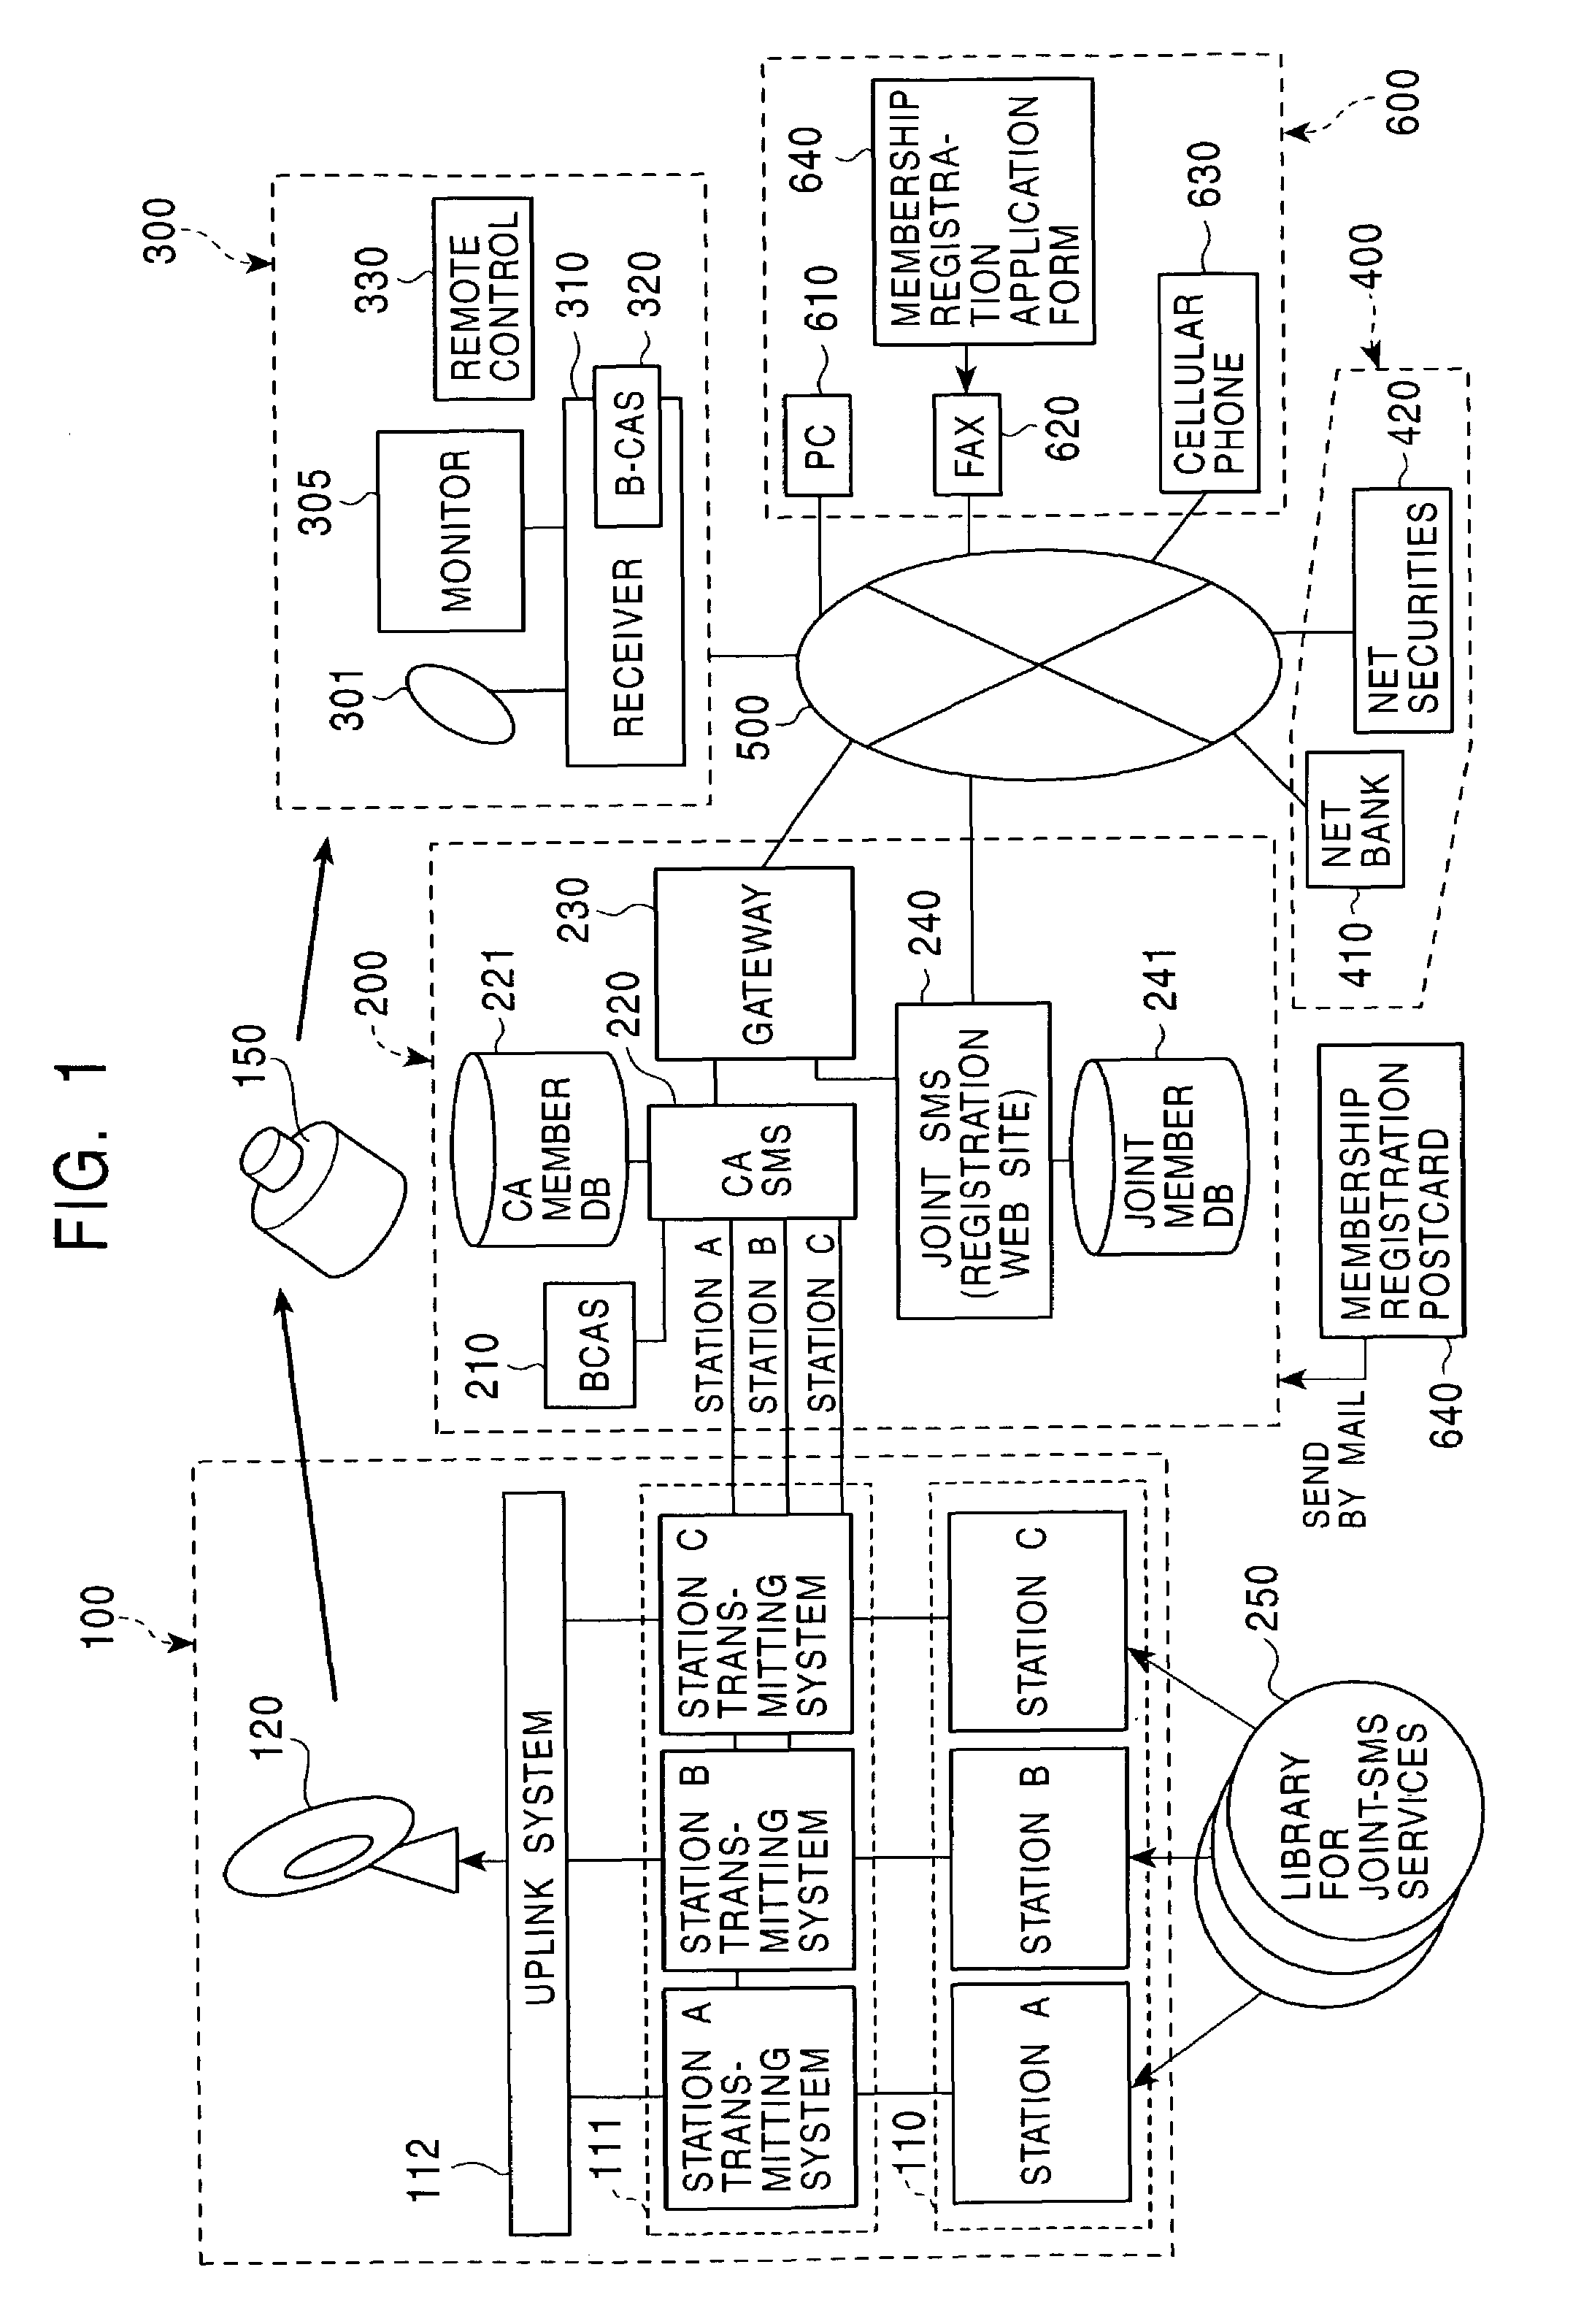 Joint subscriber management system and receiving terminal